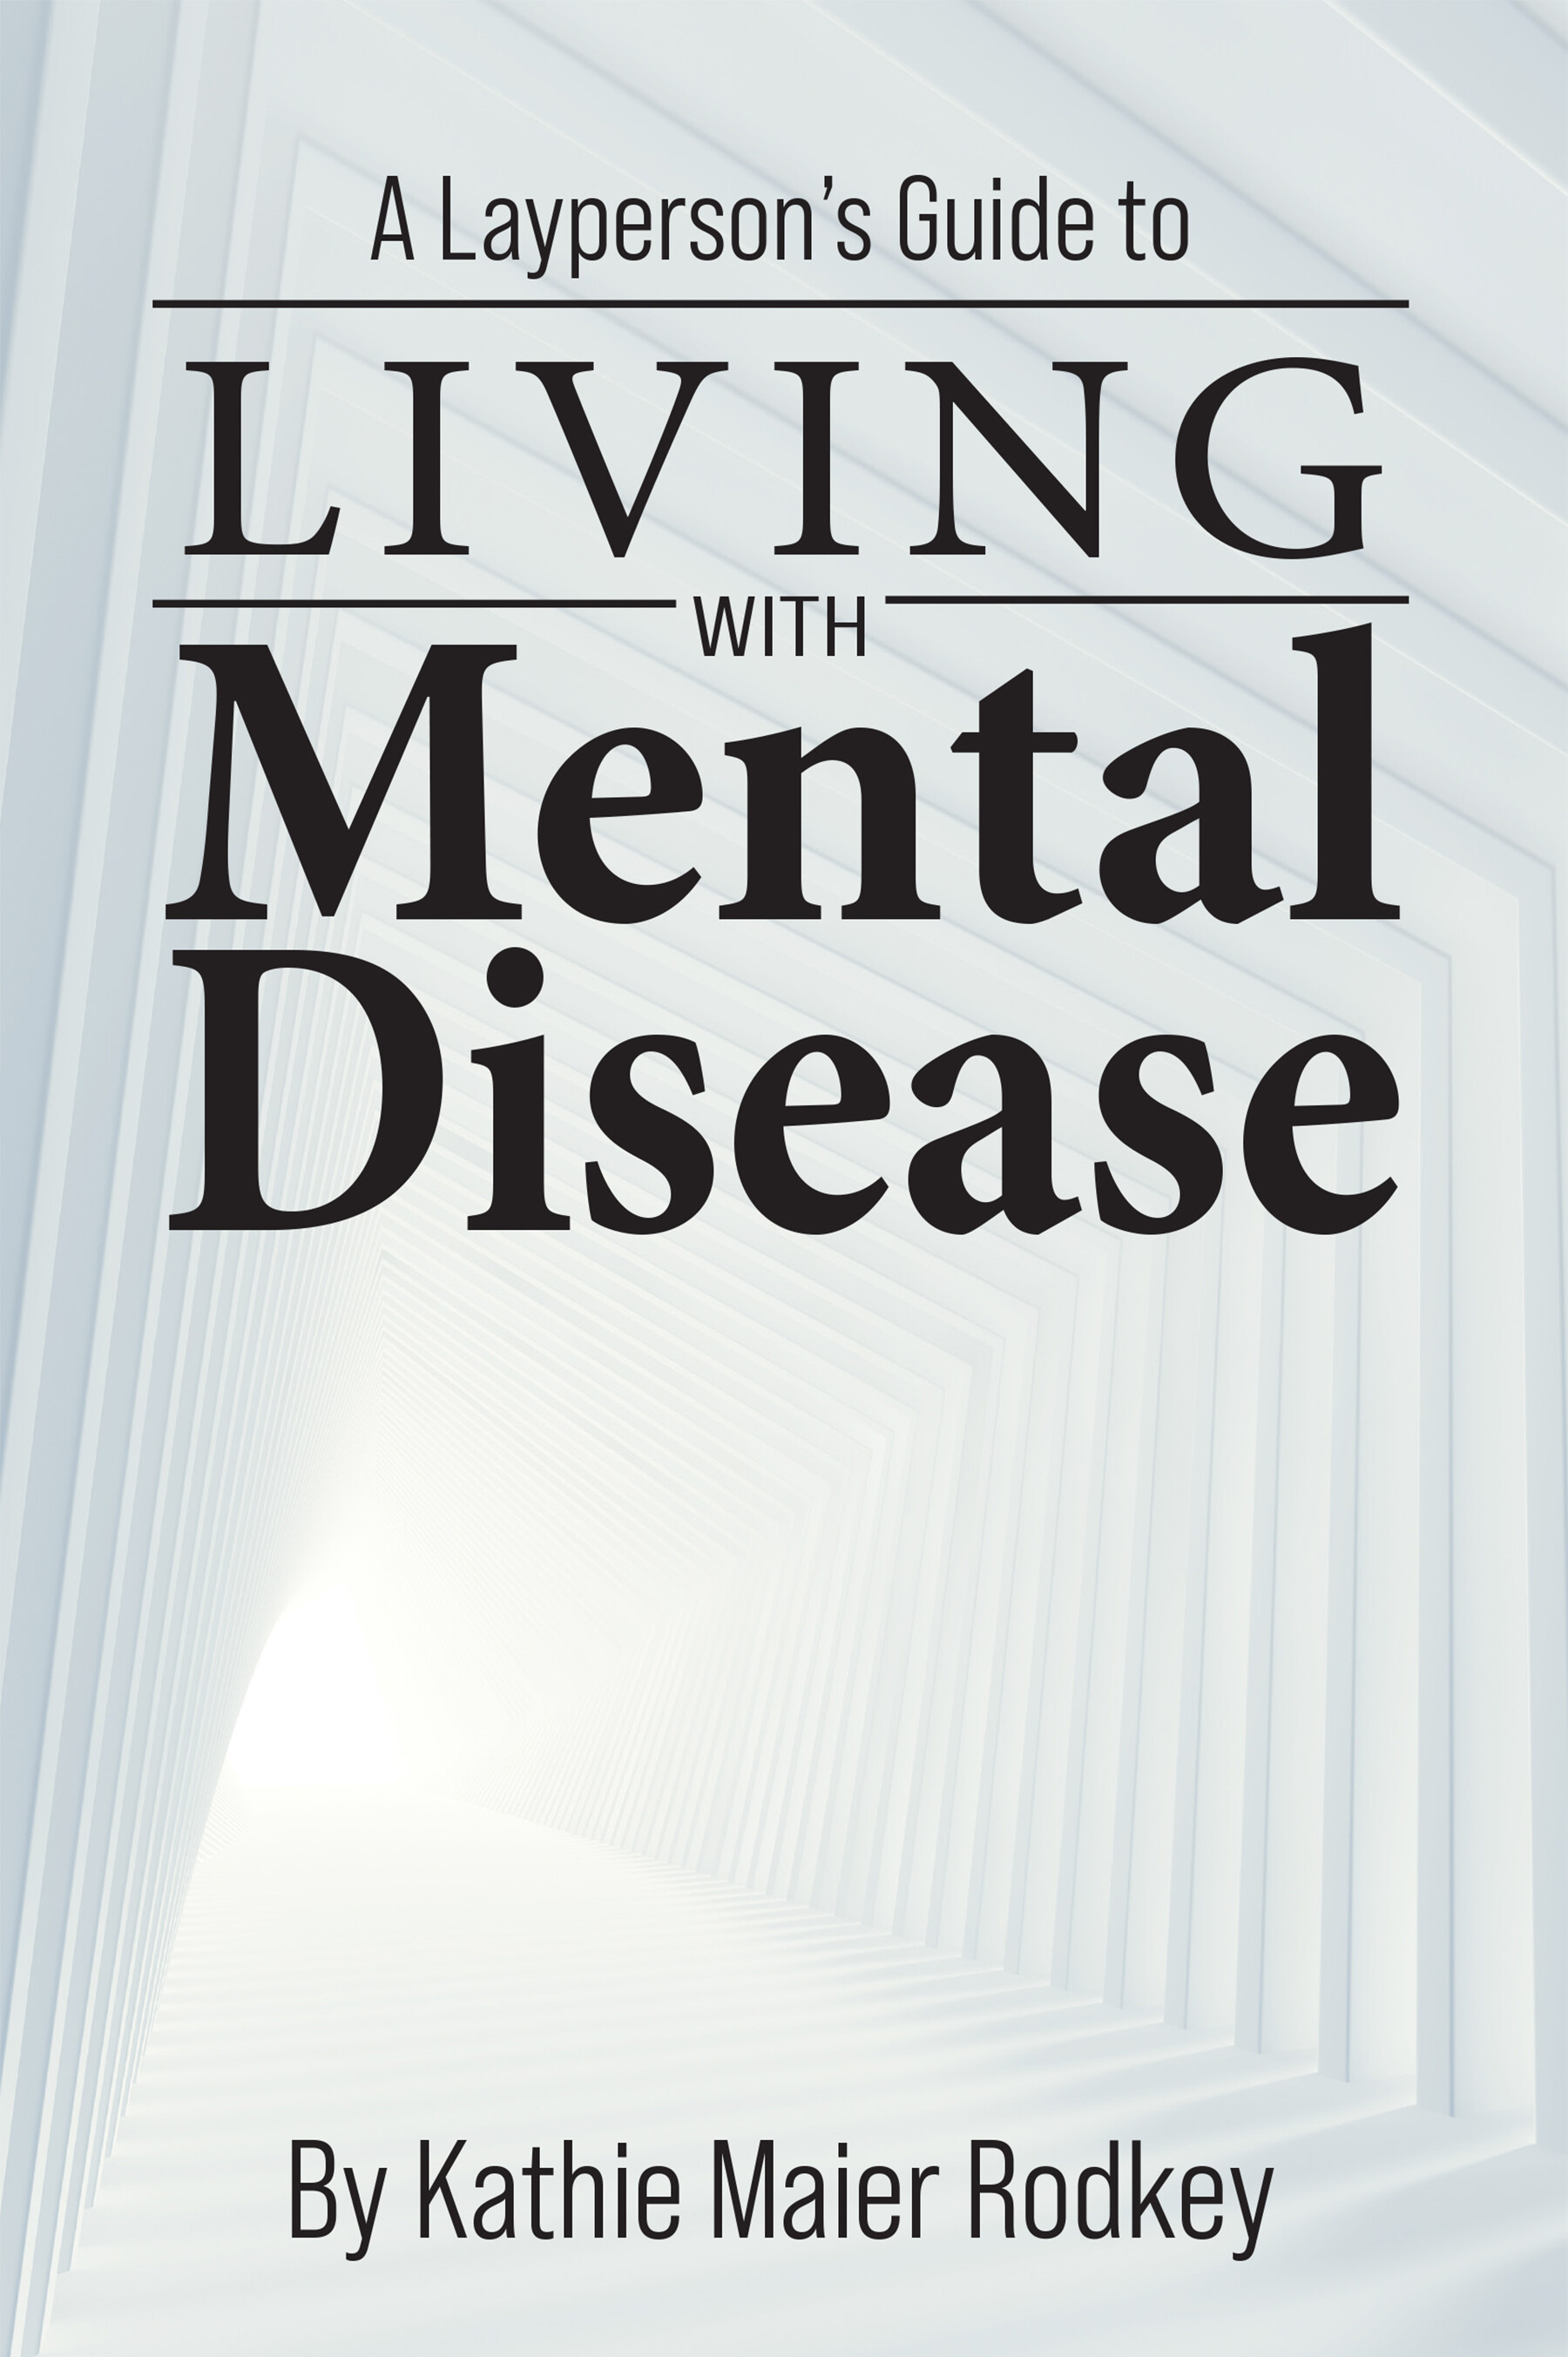 A Layperson's Guide to Living with Mental Disease